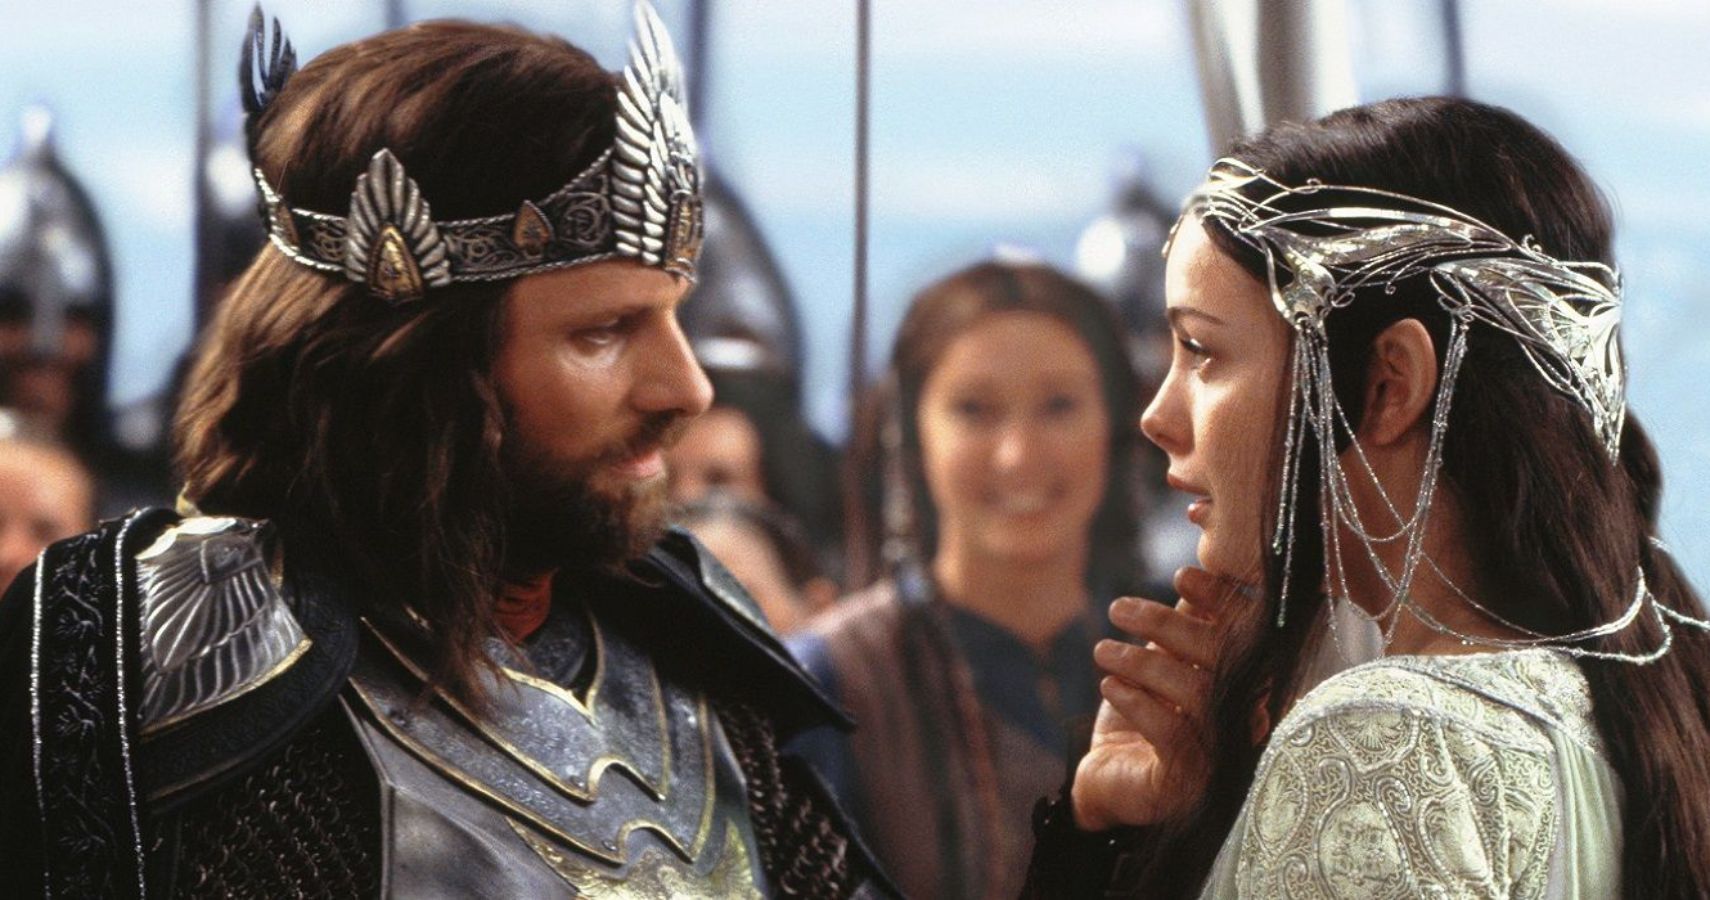 The Lord of the Rings The Return of the King Aragorn and Arwen Wedding